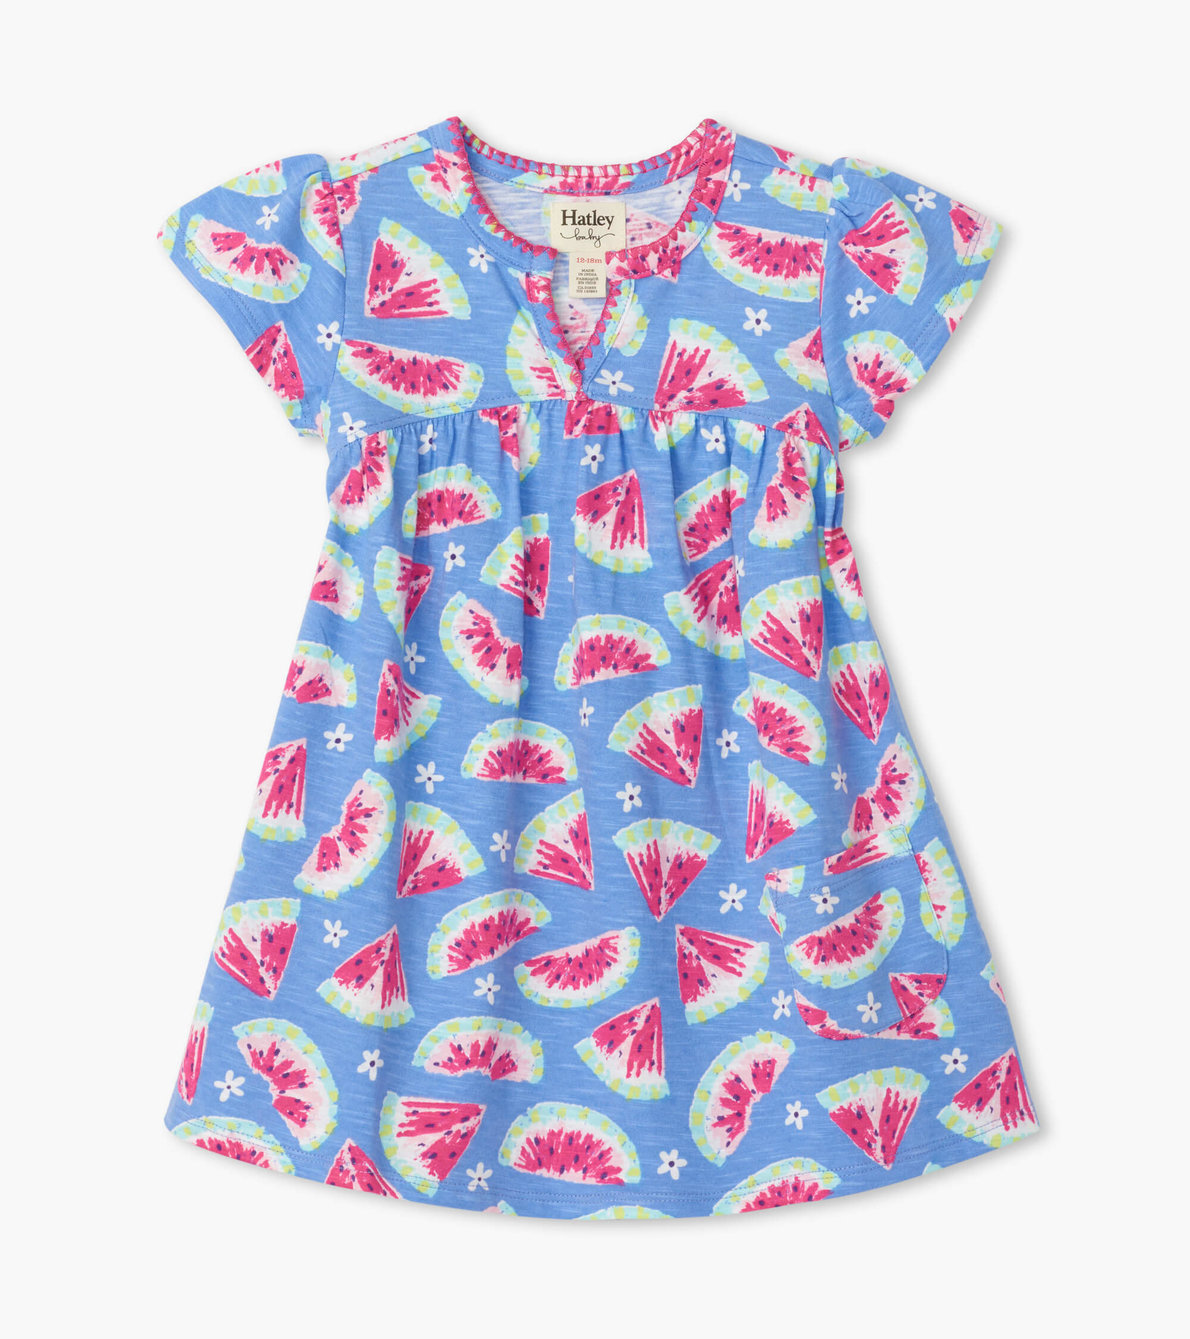 View larger image of Watermelon Slices Baby Puff Dress